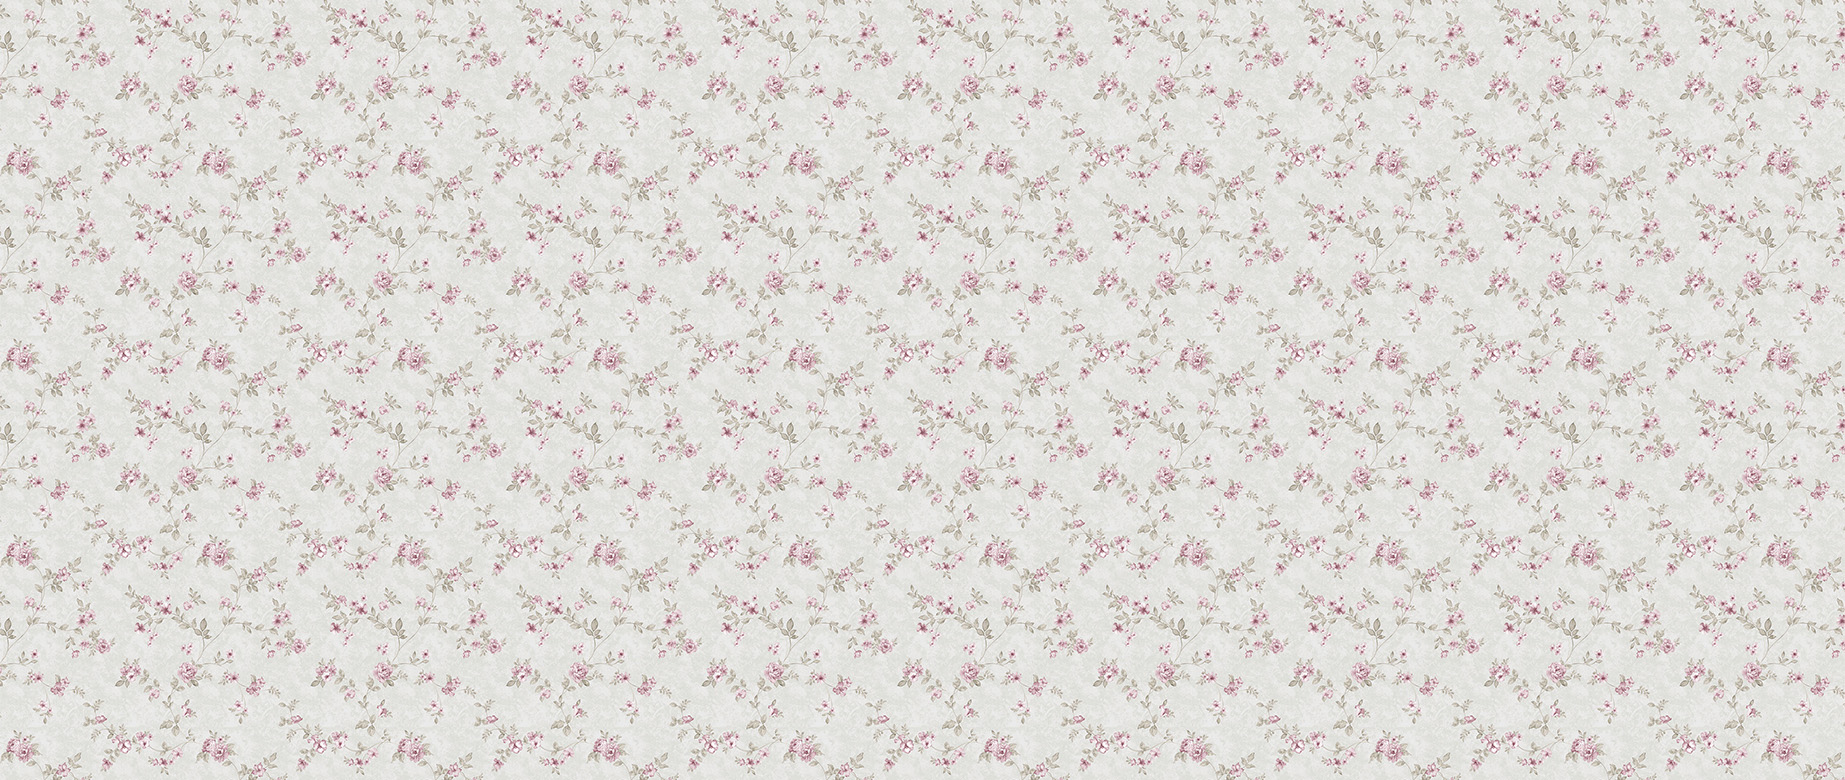 small-elegant-floral-pattern-wallpapers-full-wide-view